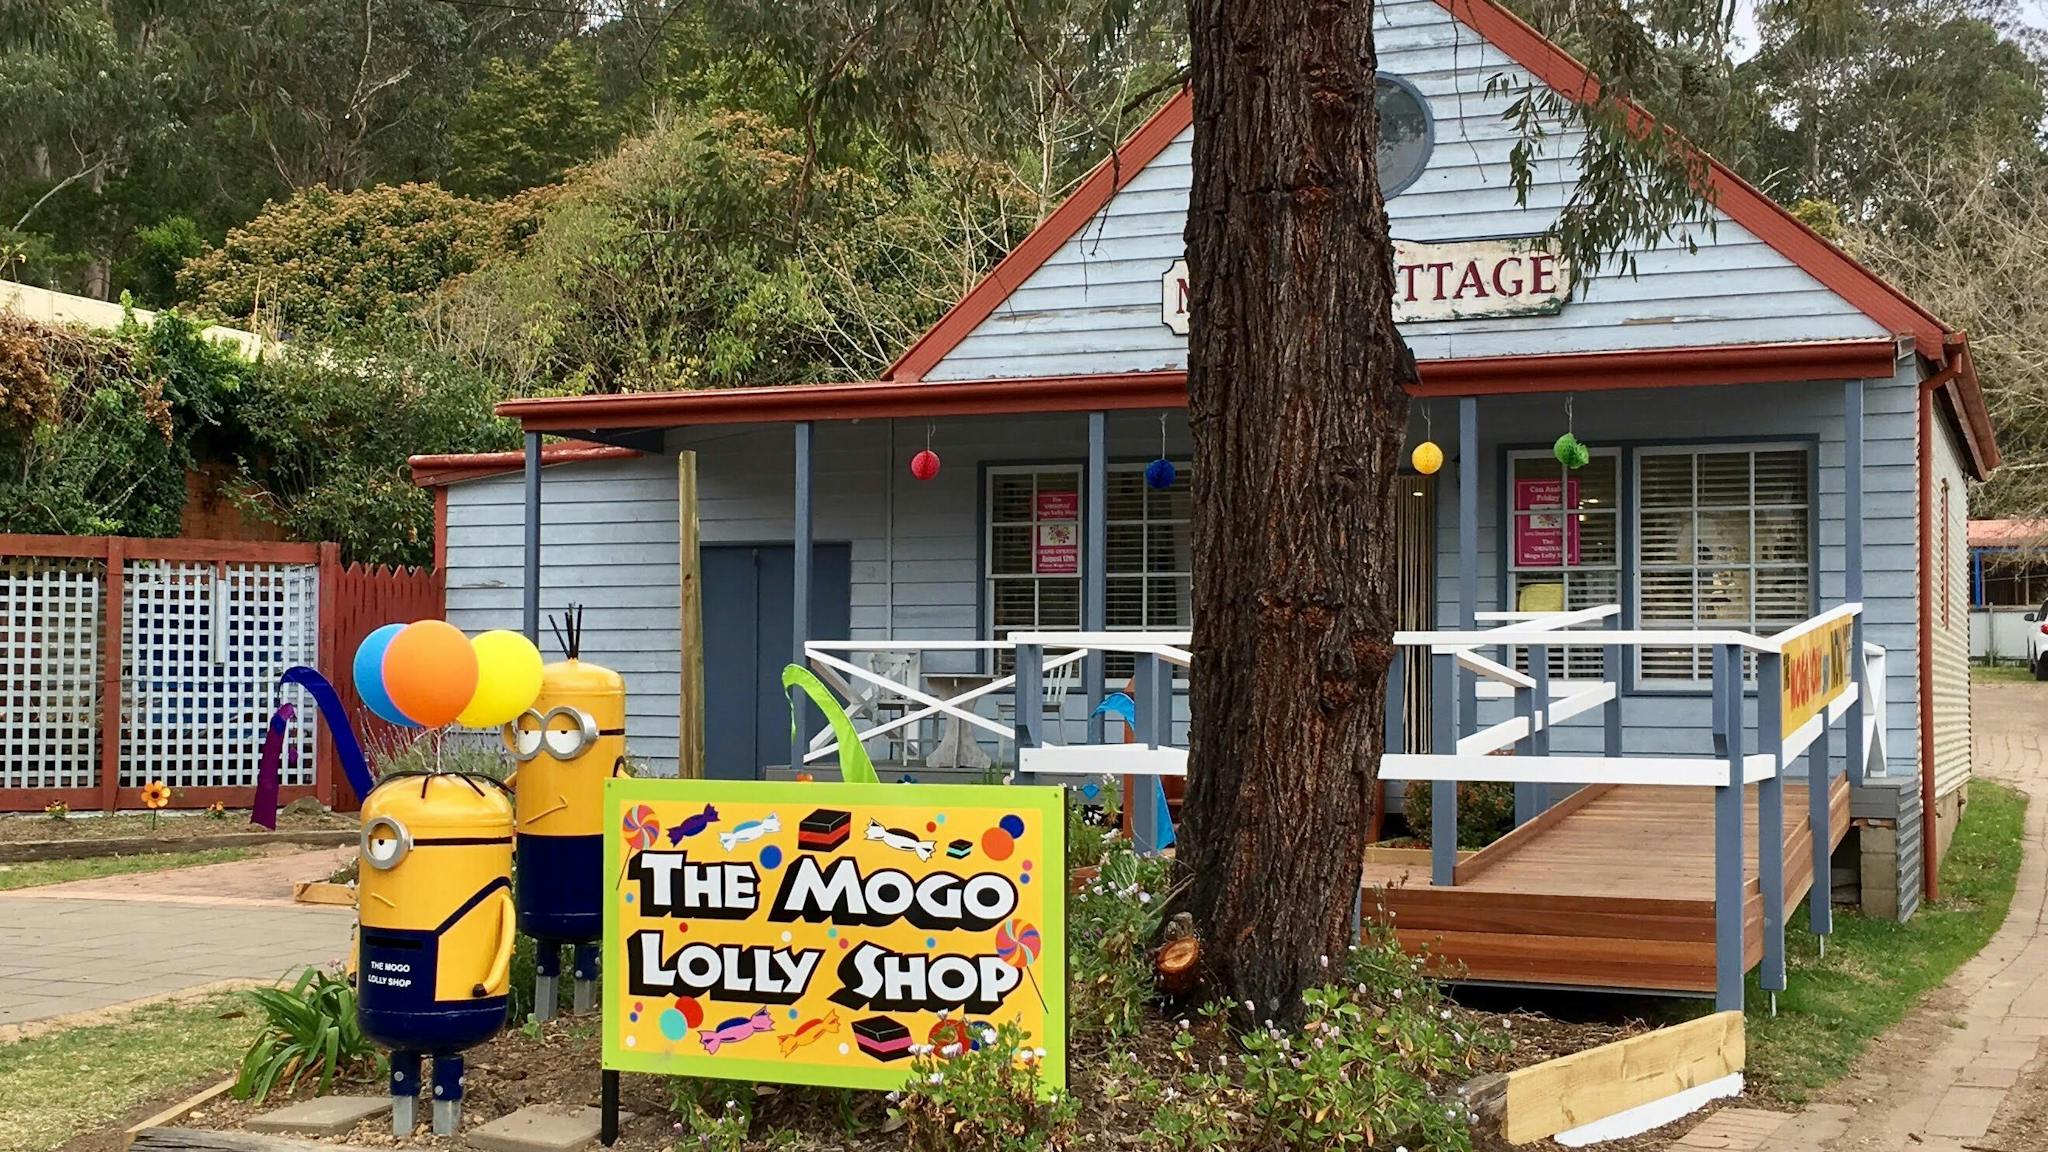 The Mogo Lolly Shop store front